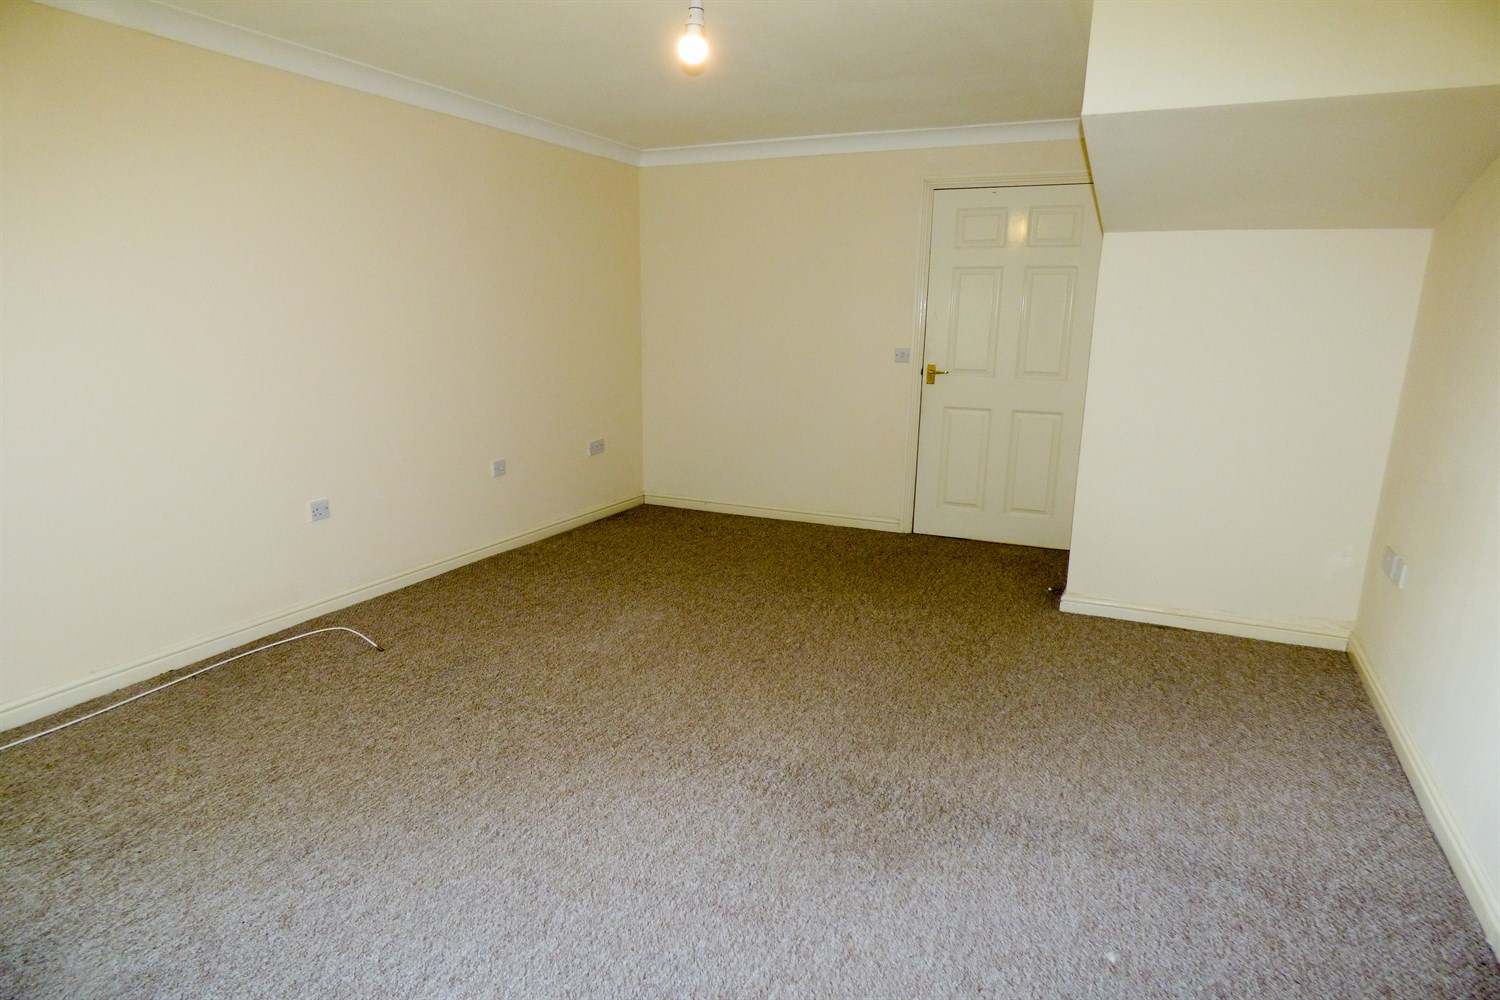 3 bed end of terraced town house for sale in Sanderson Villas, Gateshead  - Property Image 2